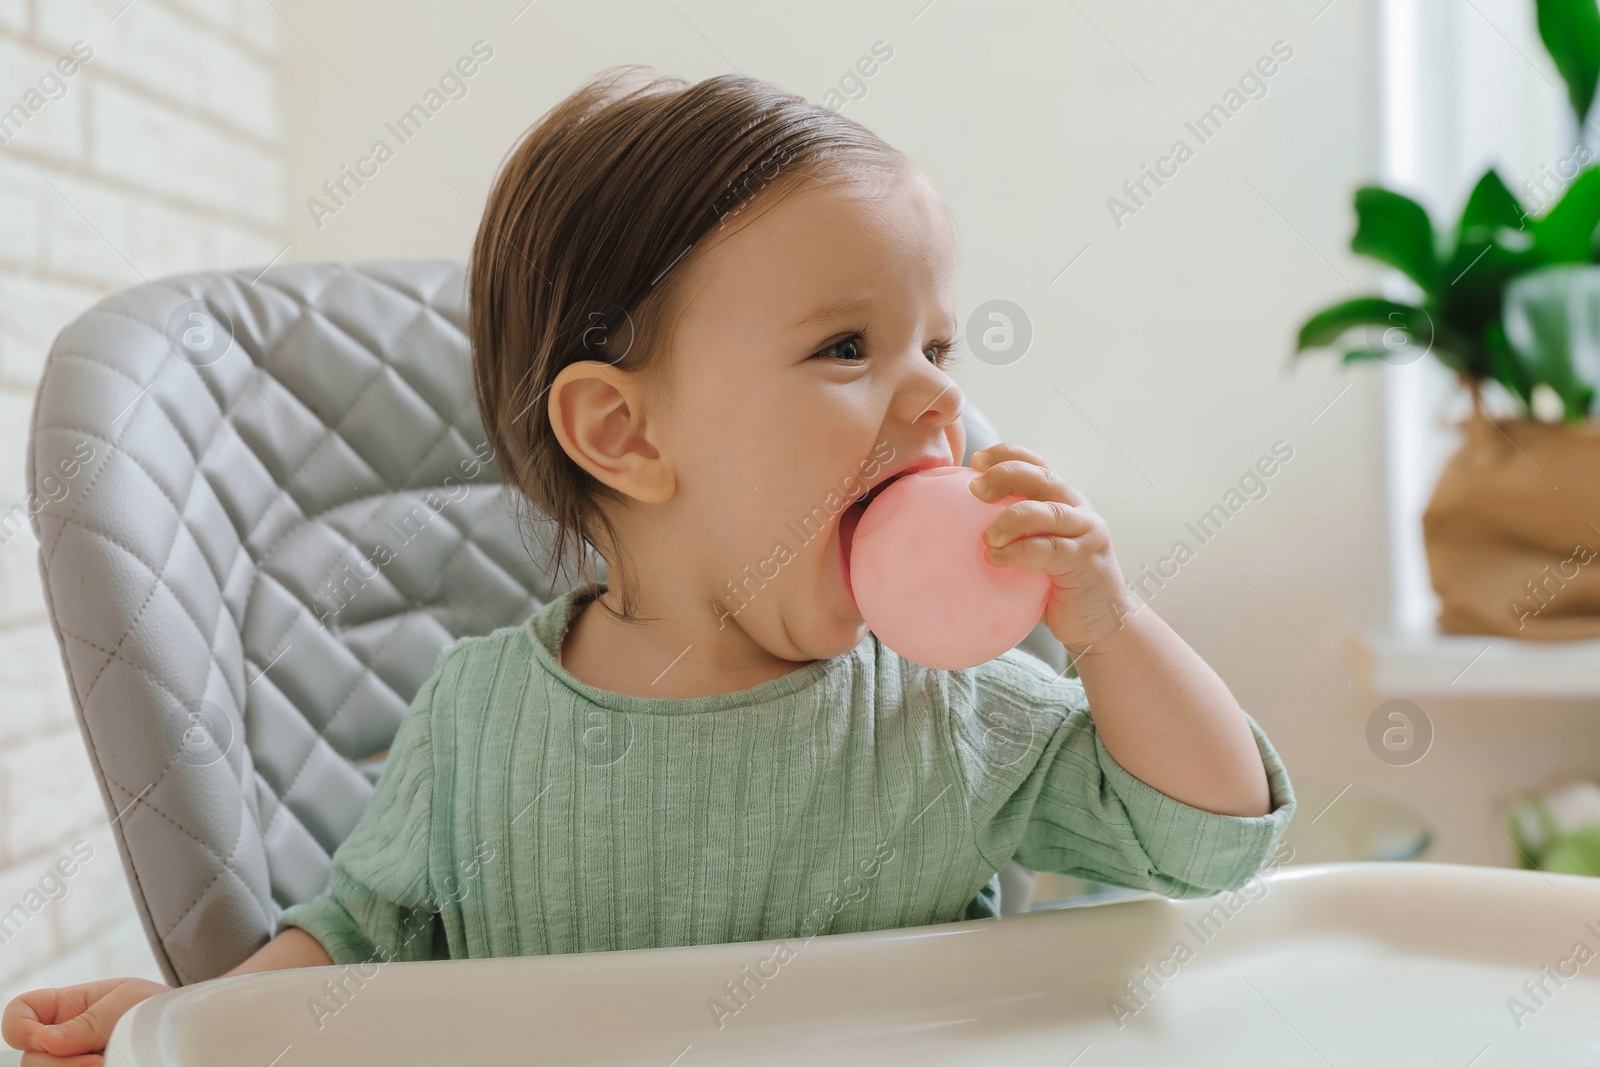 Photo of Cute little baby nibbling toy in high chair indoors